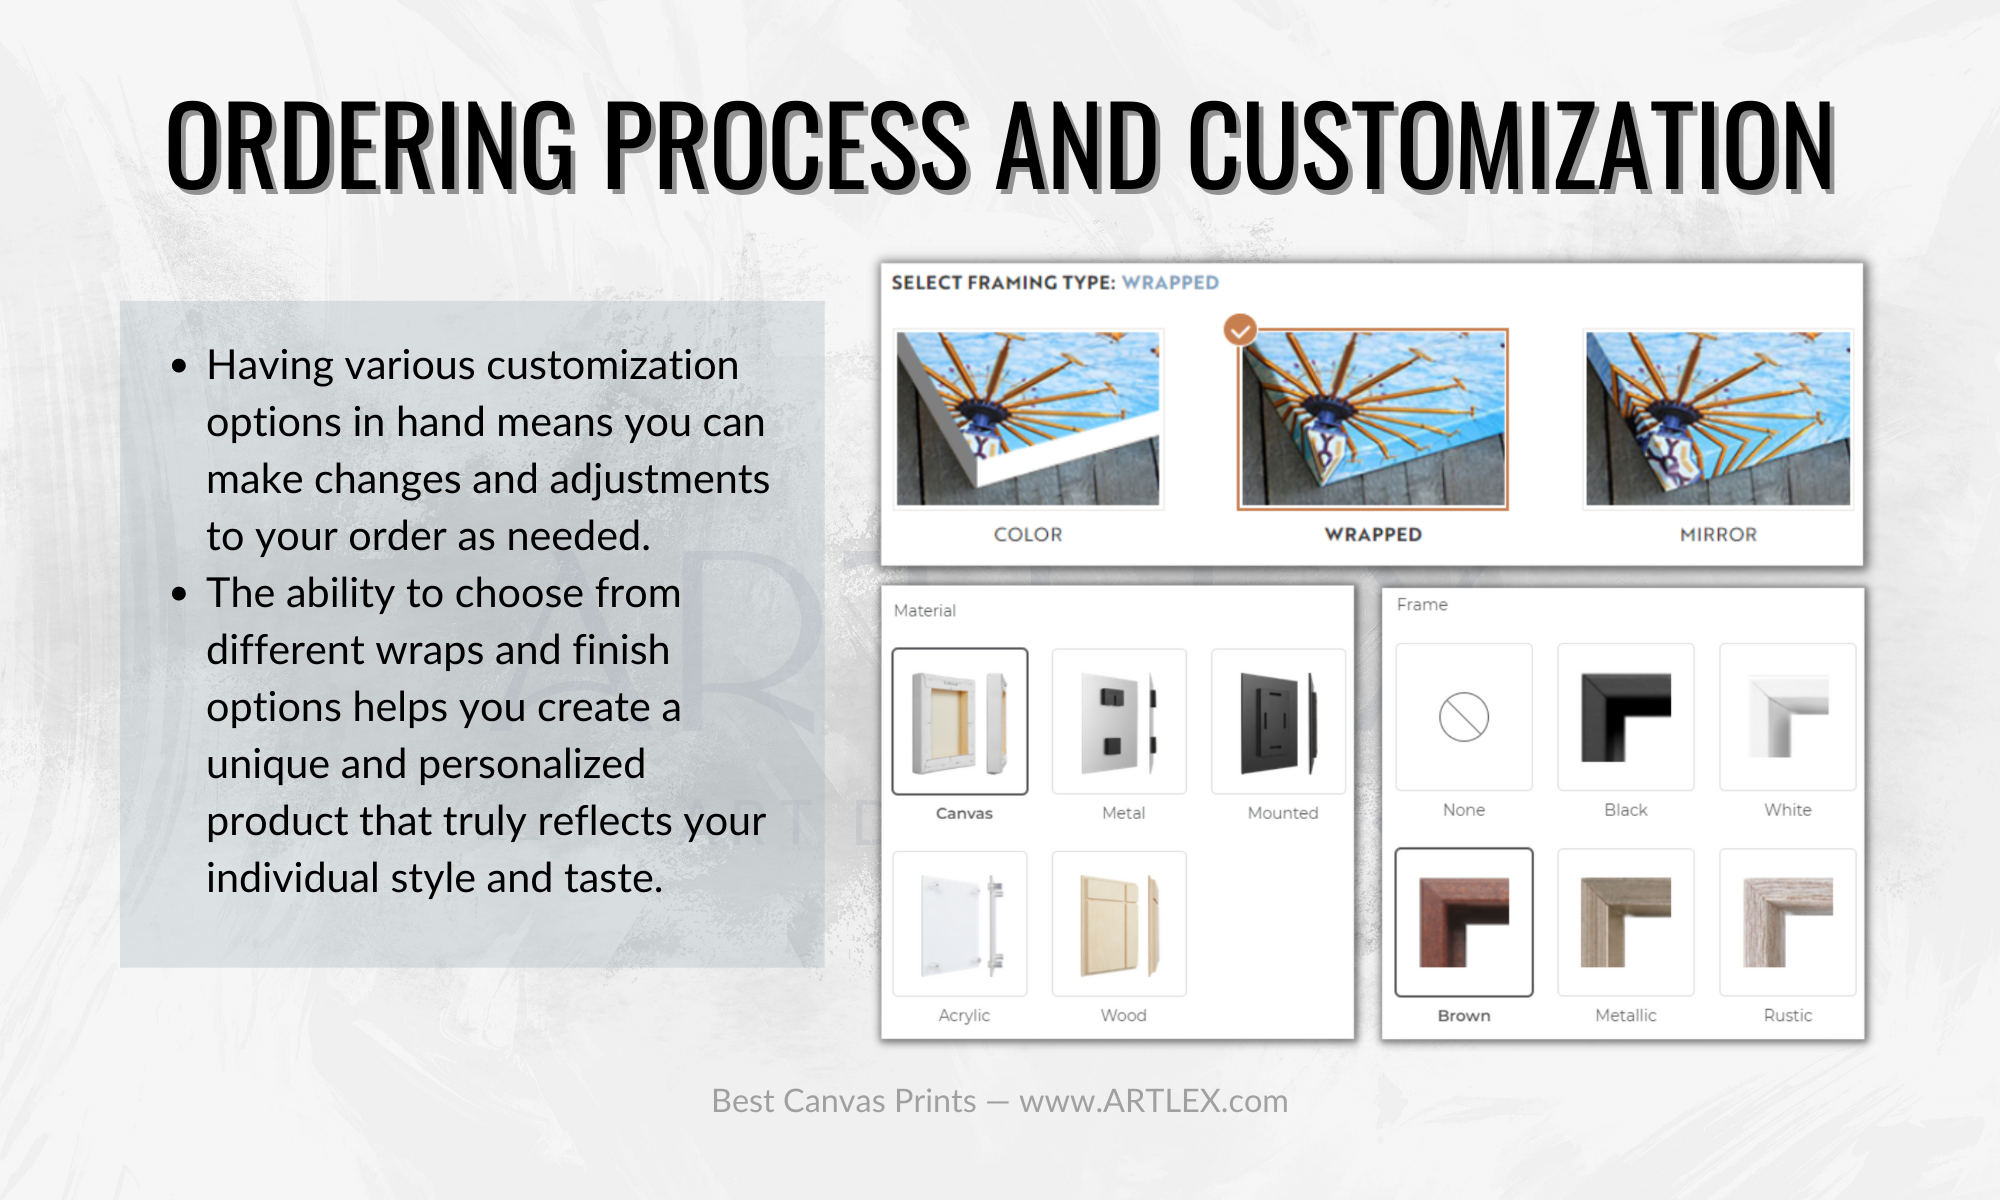 Ordering Process and Customization for Canvas Prints